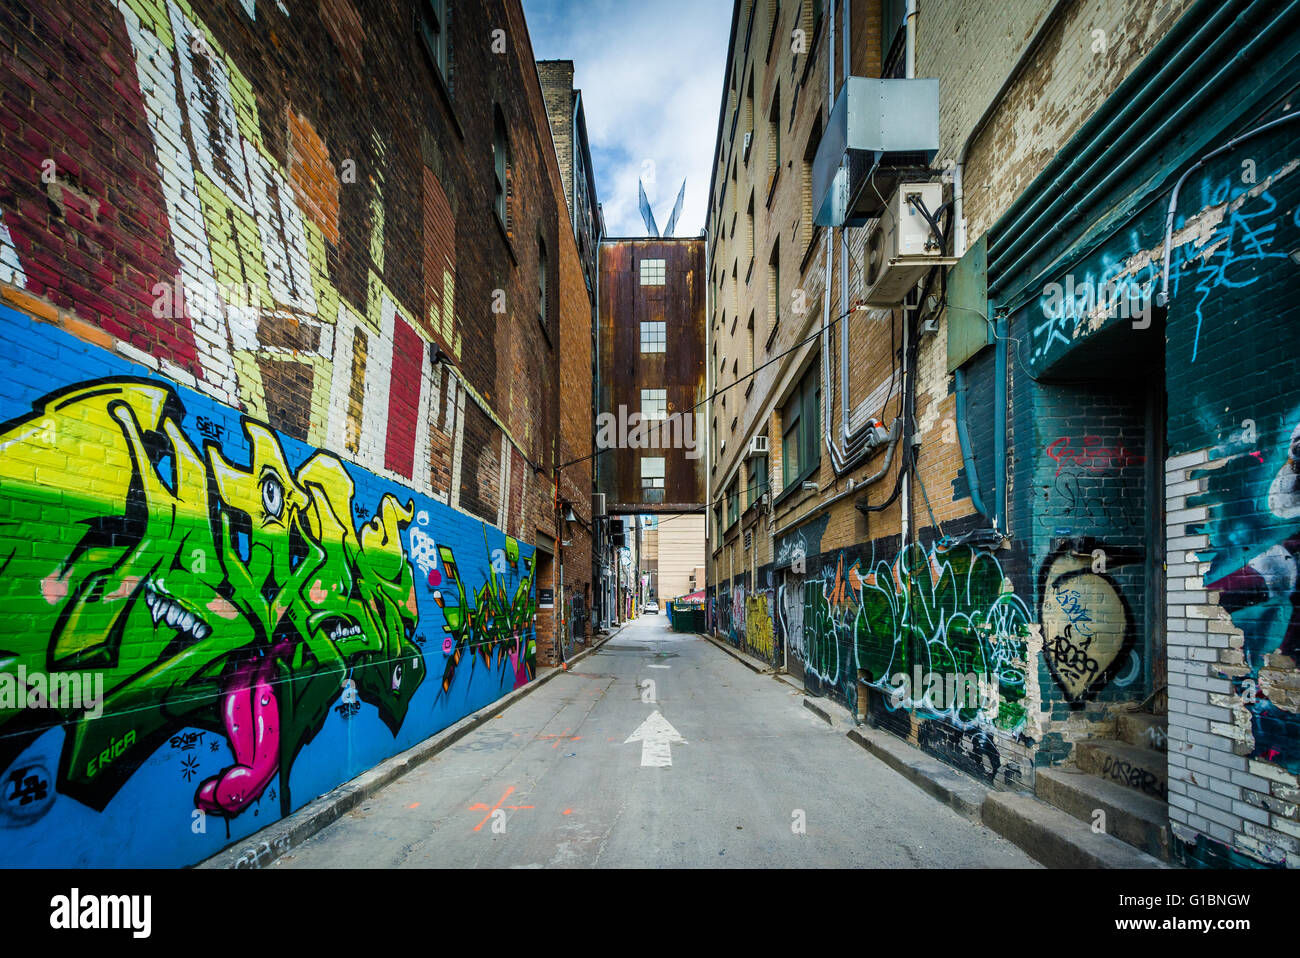 Graffiti in an alley in the Fashion District, of Toronto, Ontario. Stock Photo